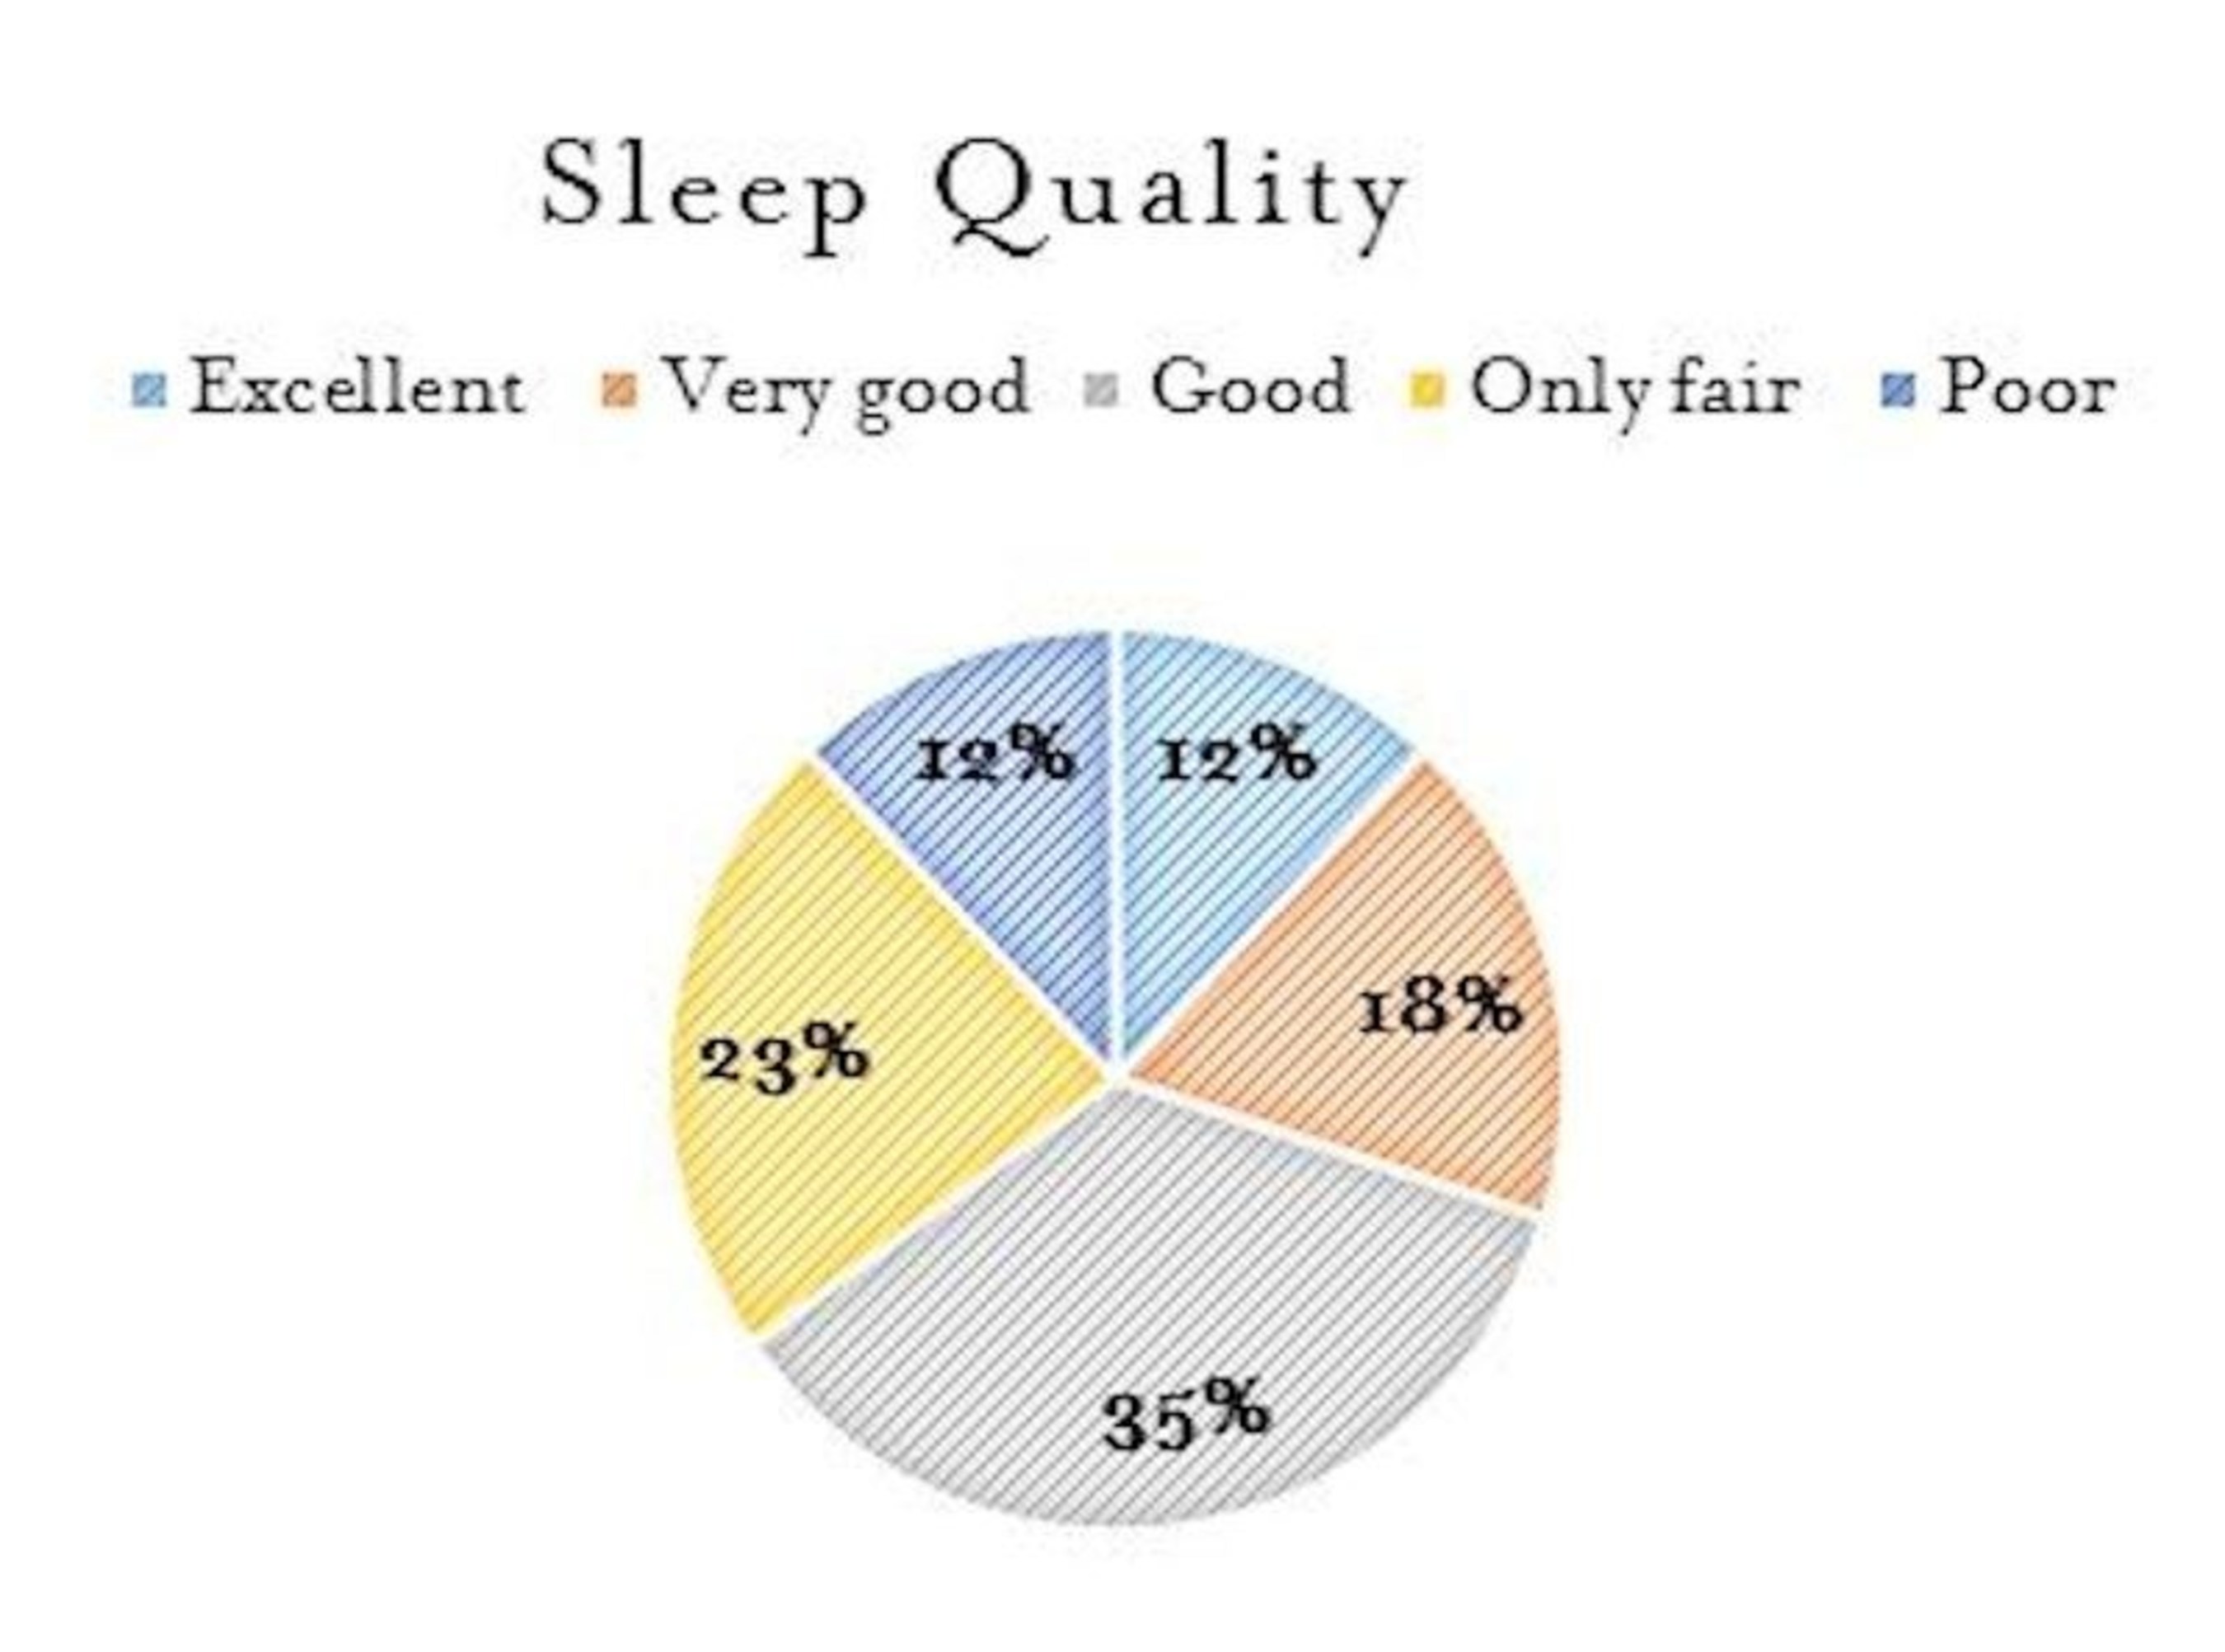 Americans report sleeping an average of 7 hours and 36 minutes a night. Despite sleeping within the recommended number of hours a night, 35 percent of Americans report sleep quality as "poor" or "only fair."